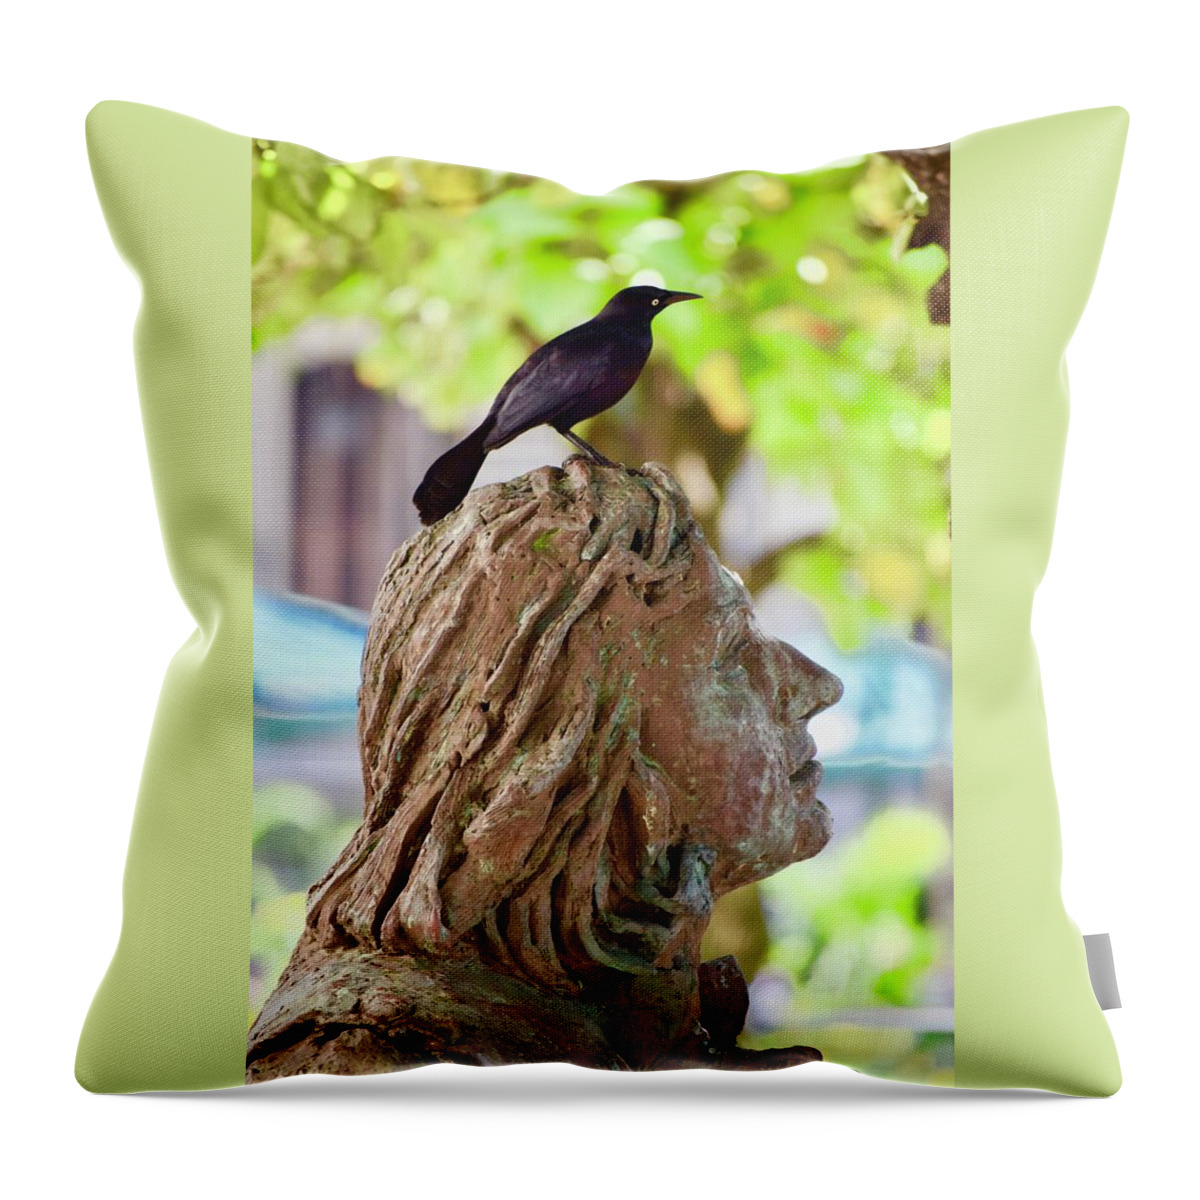 Photograph Throw Pillow featuring the photograph Look by Debra Grace Addison